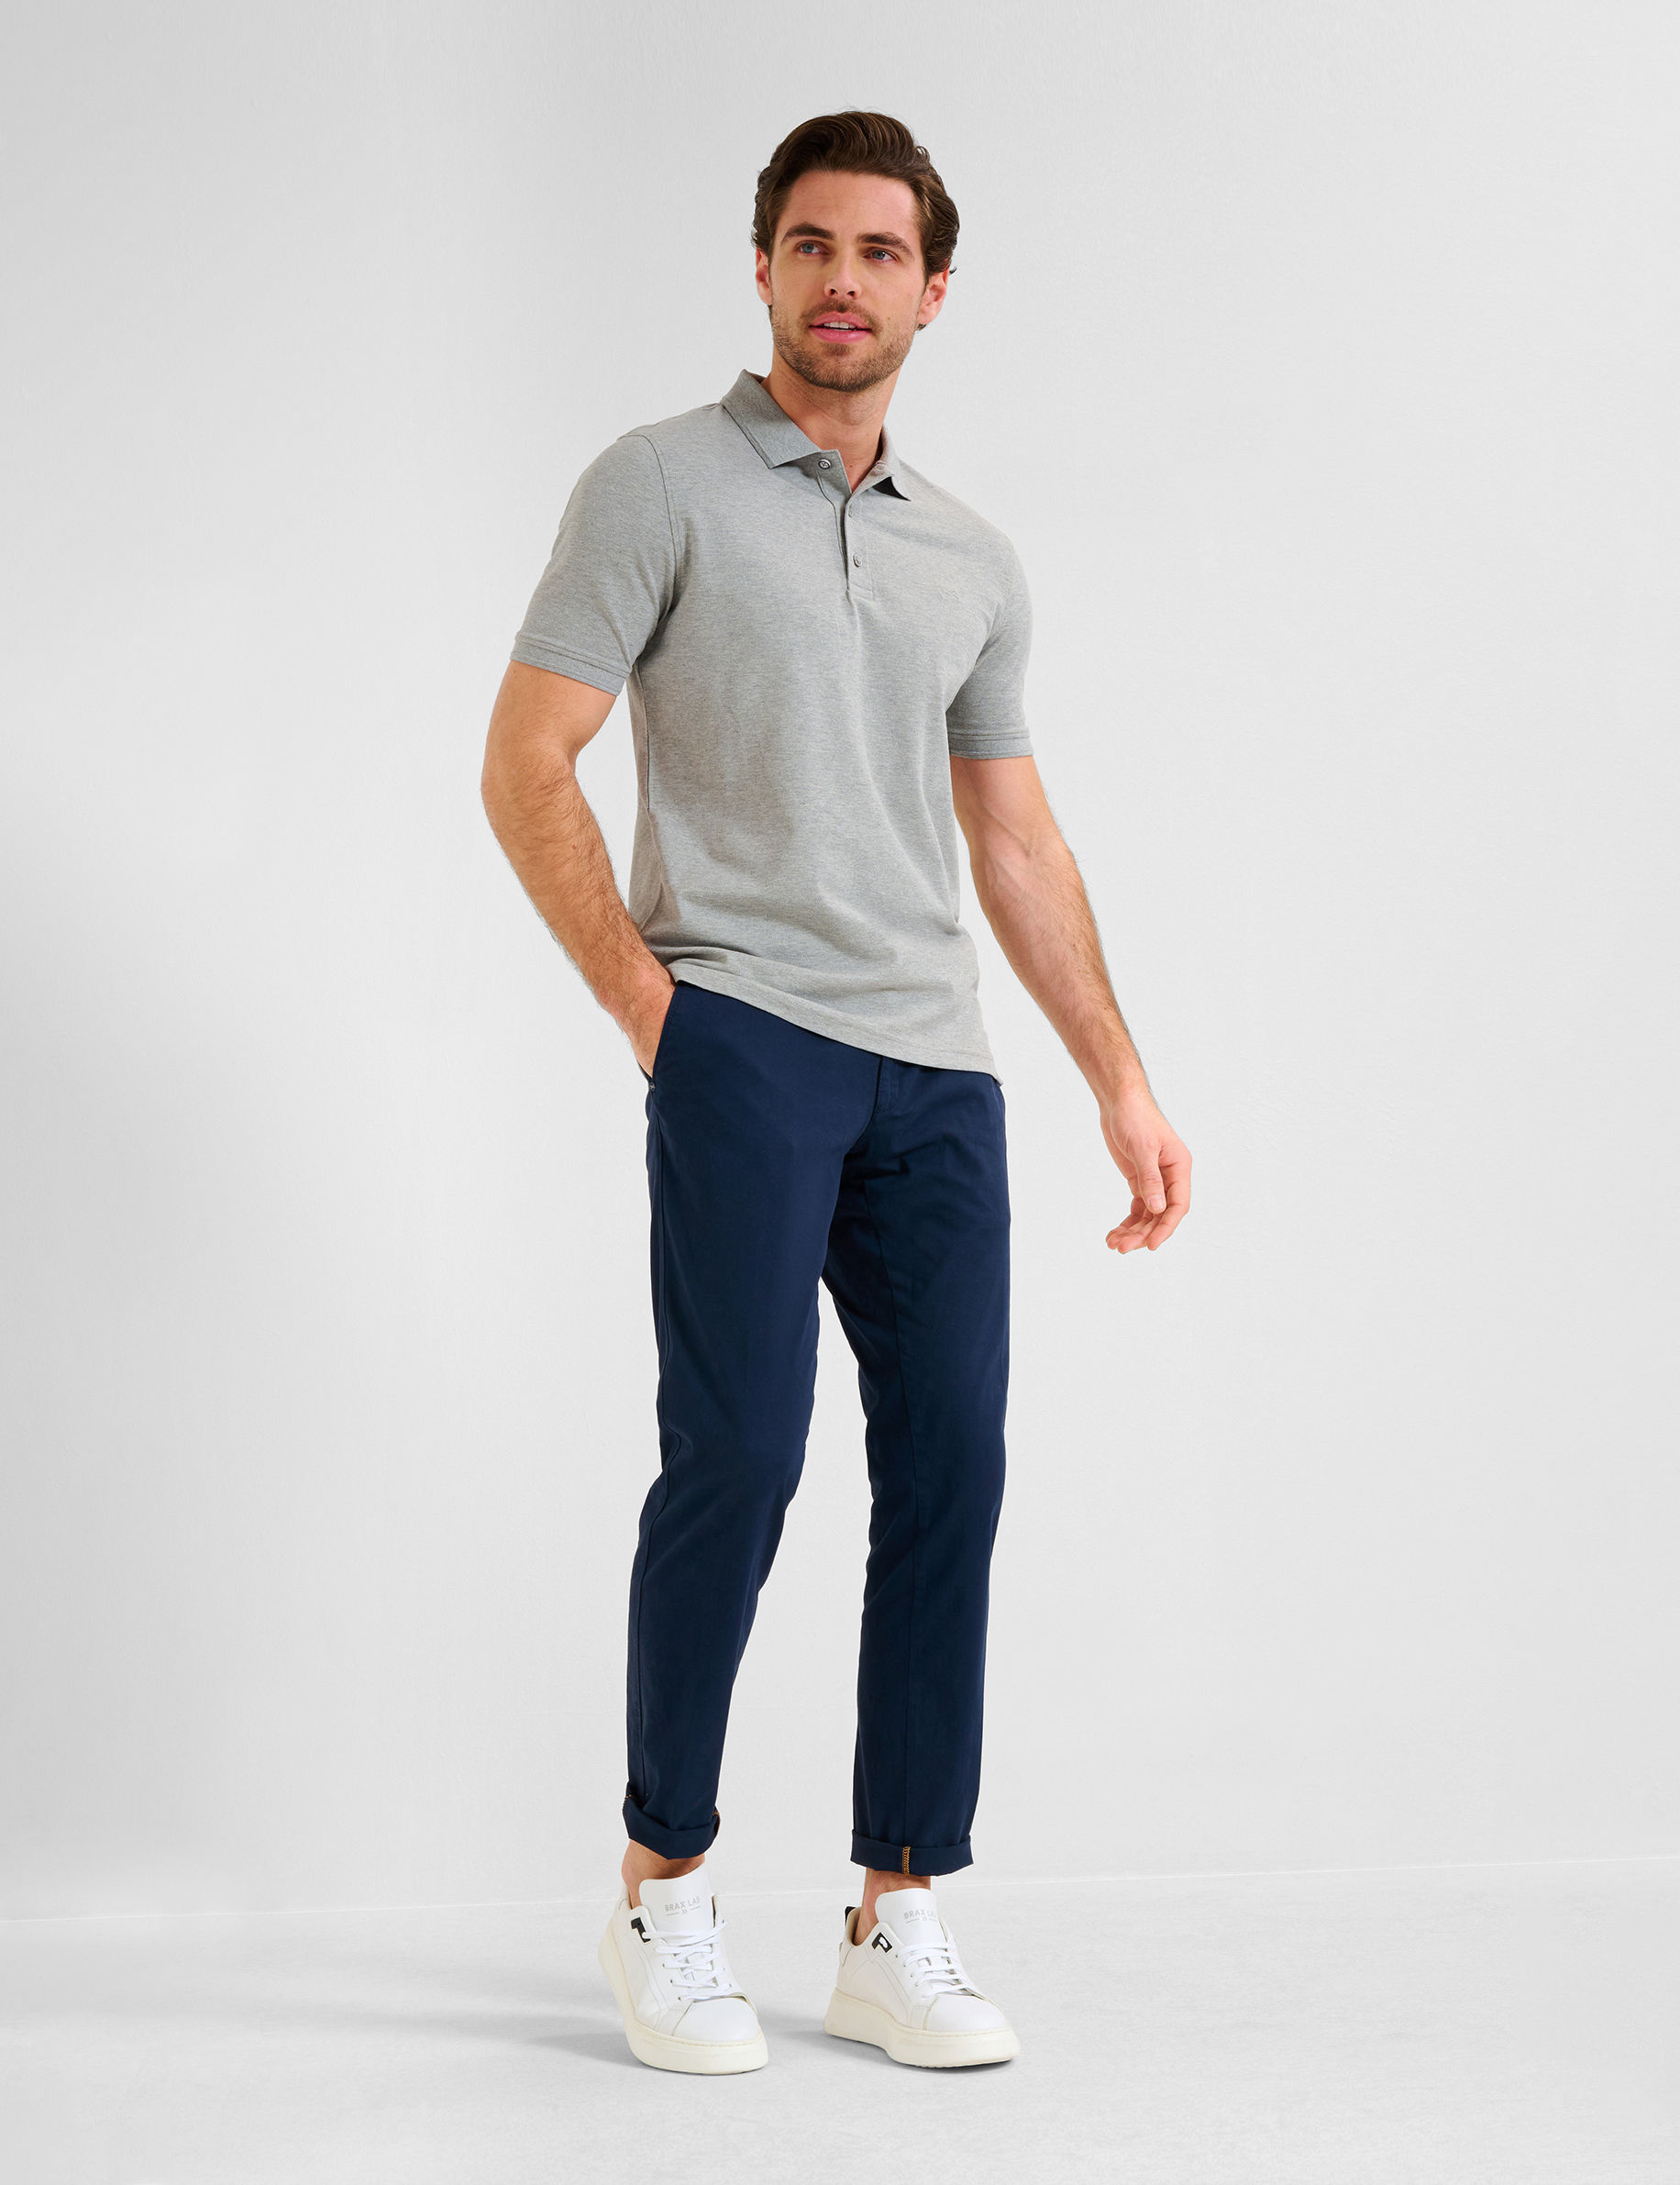 Men Style PETE shade  Model Outfit